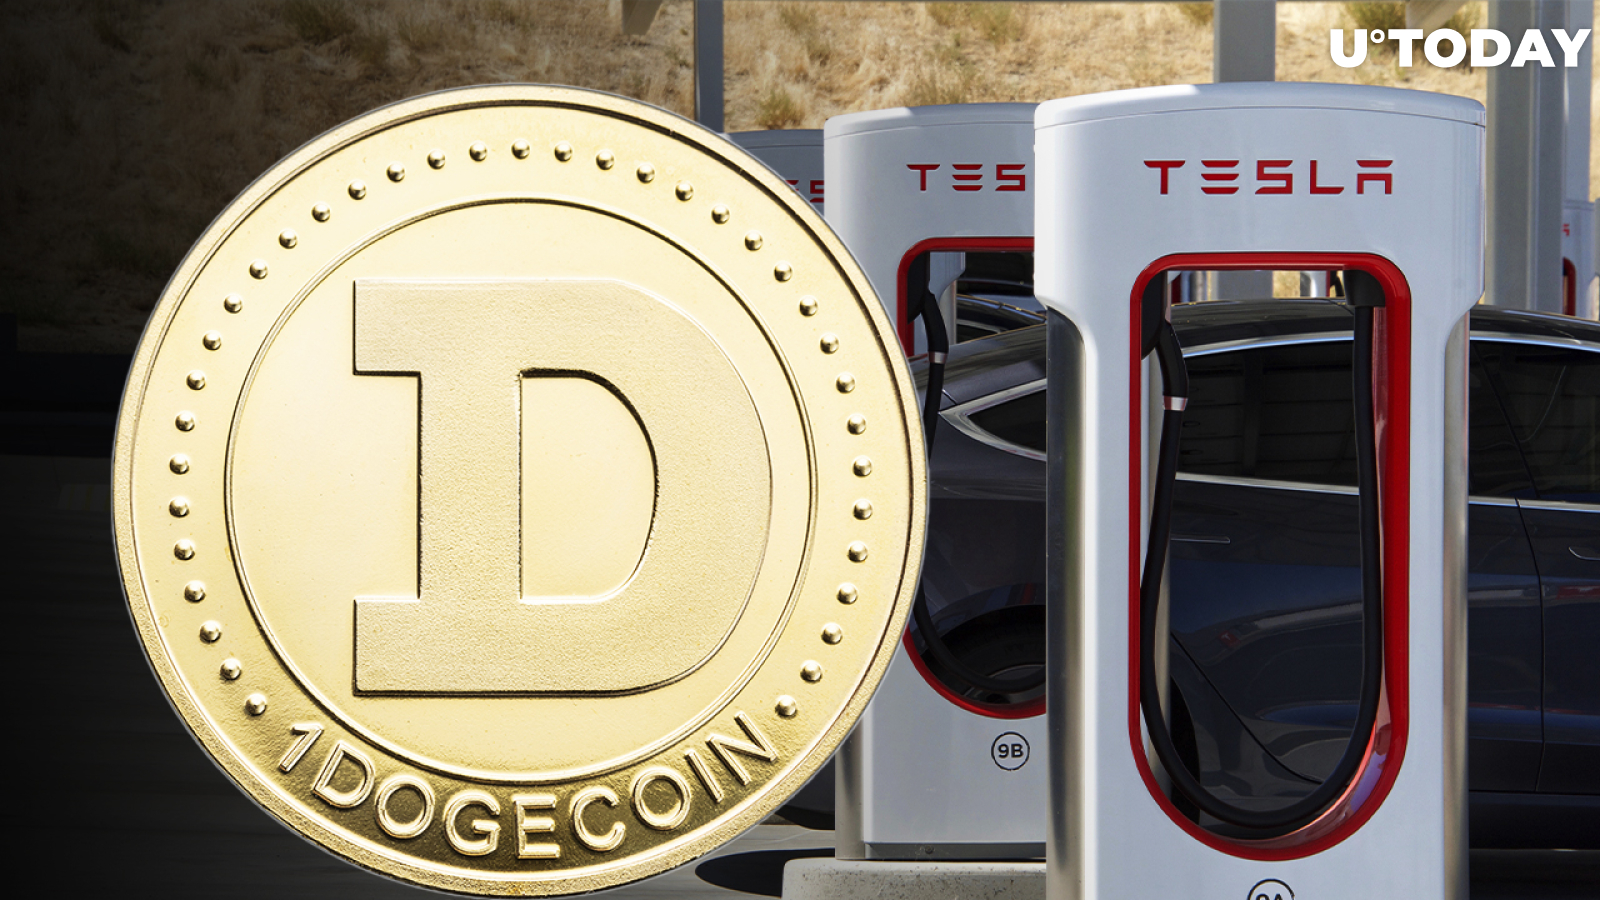 Elon Musk Hints DOGE May Be Used as Payment at Tesla Charging Stations in the Future 